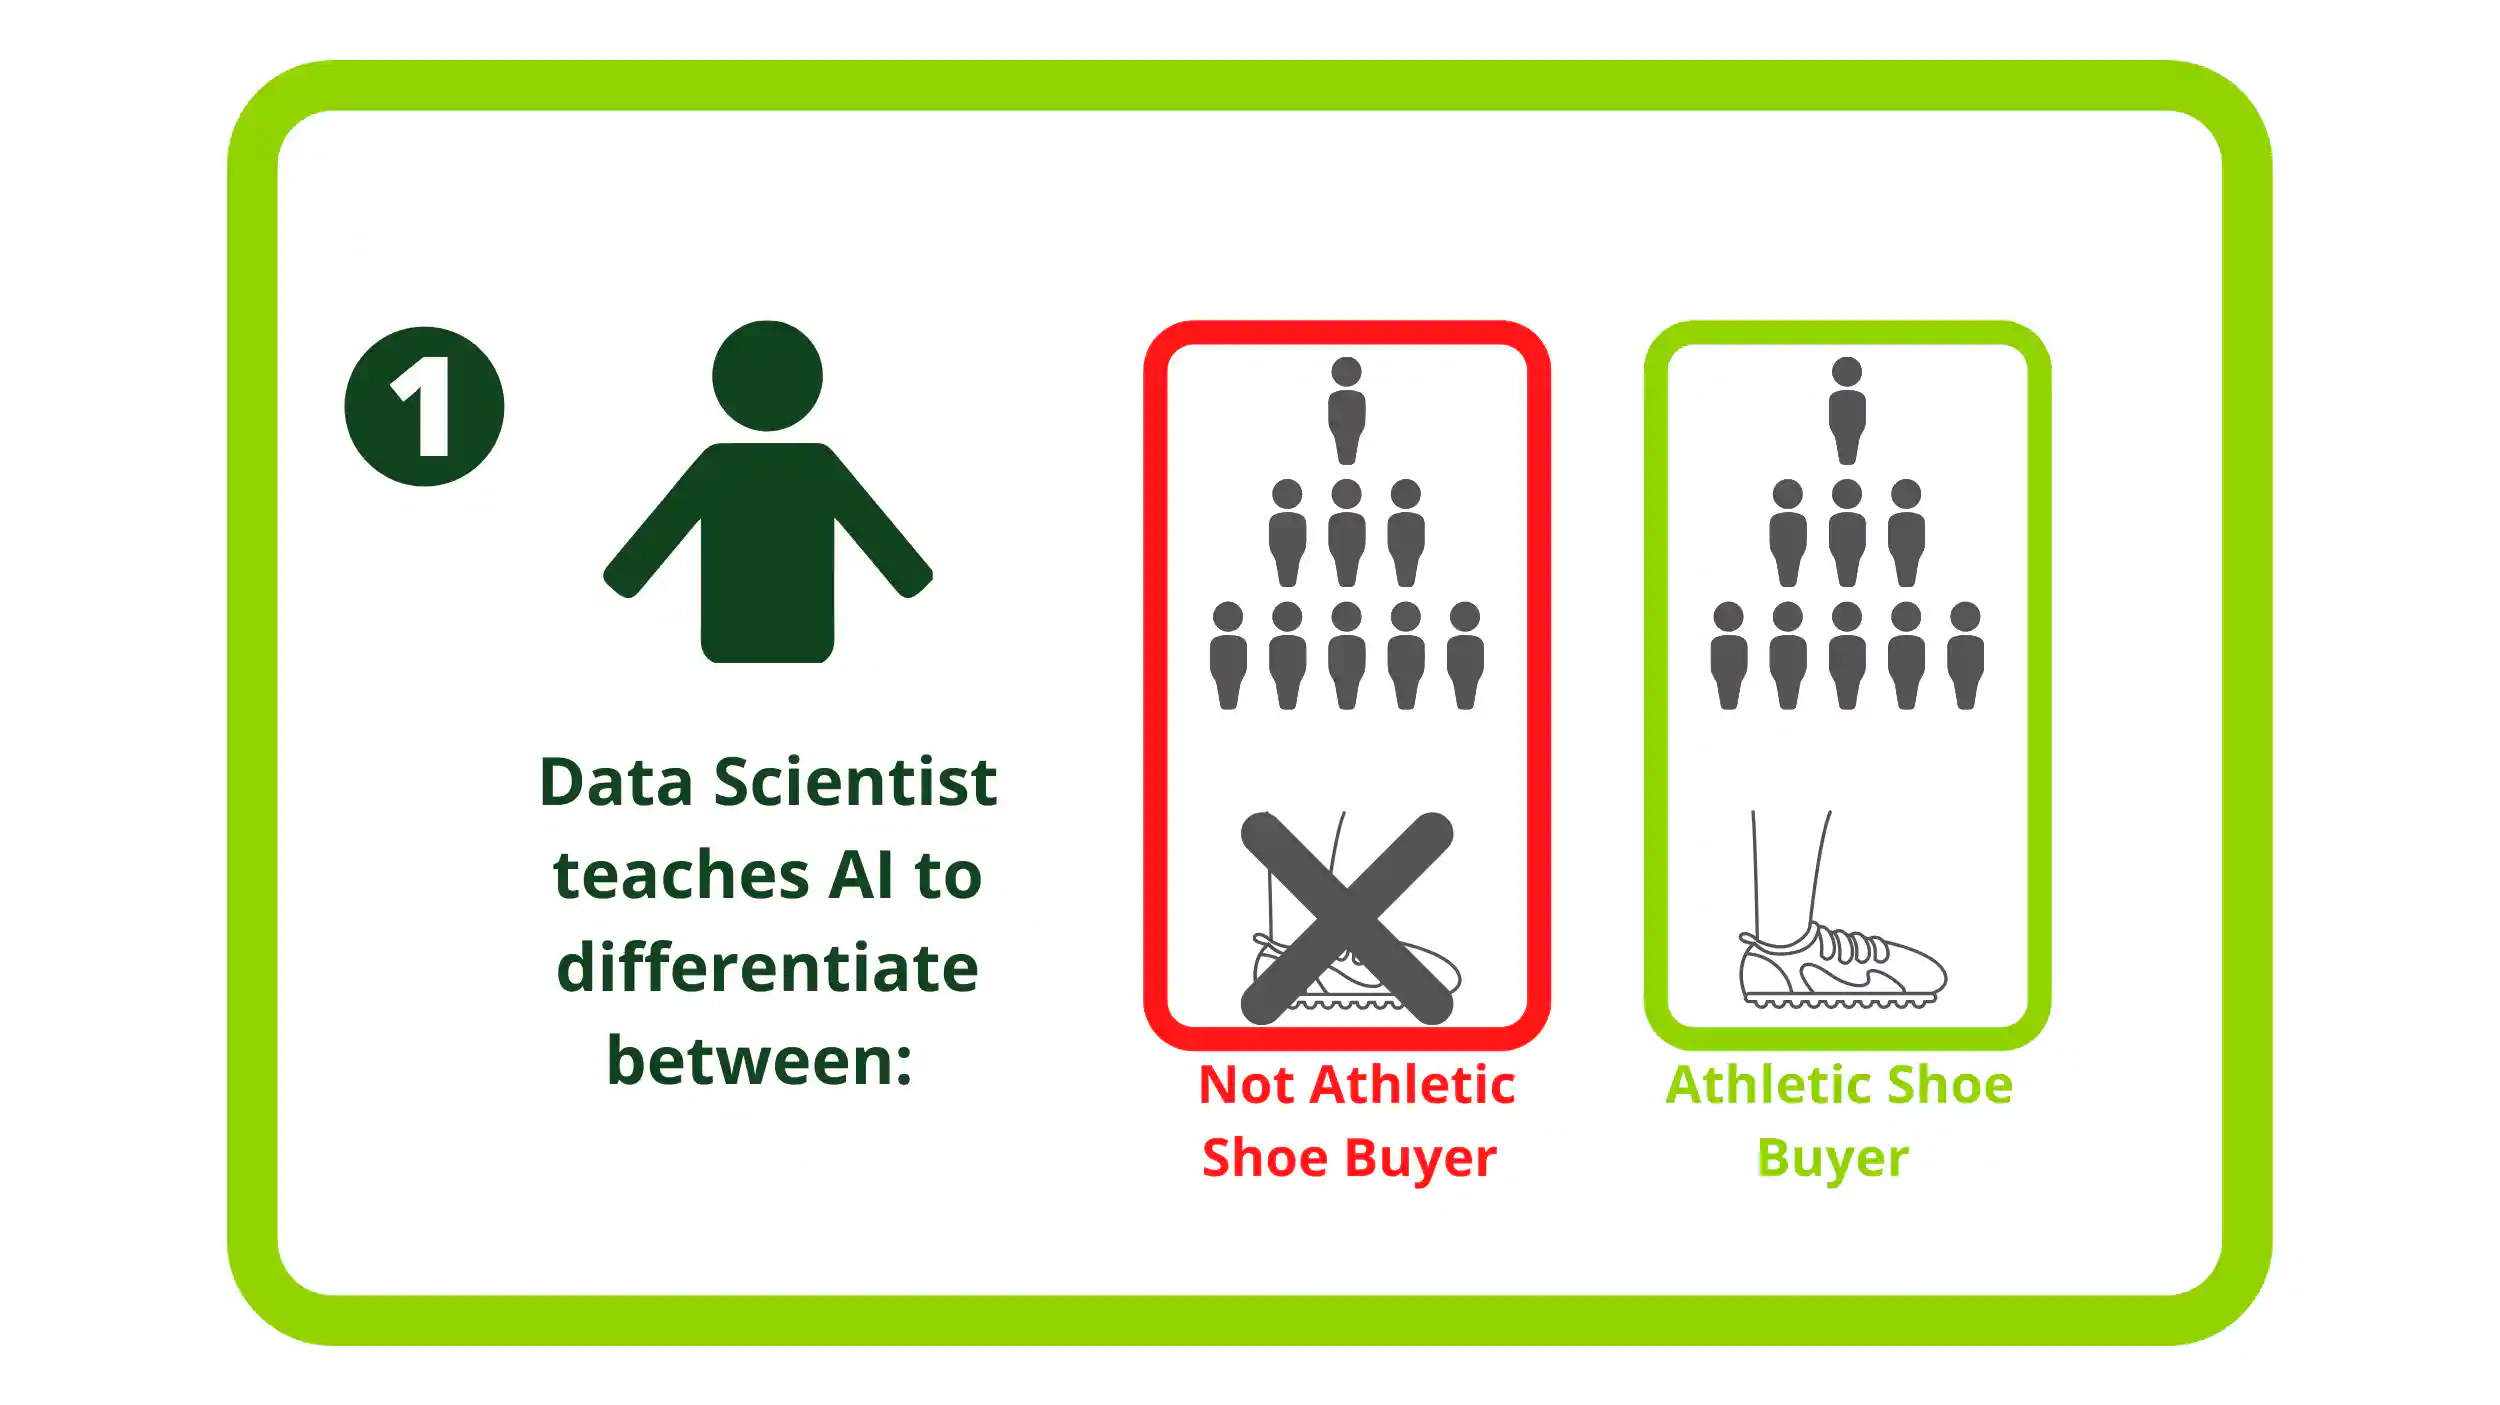 Data scientist teaches AI to differentiate between athletic and non-athletic shoe buyer